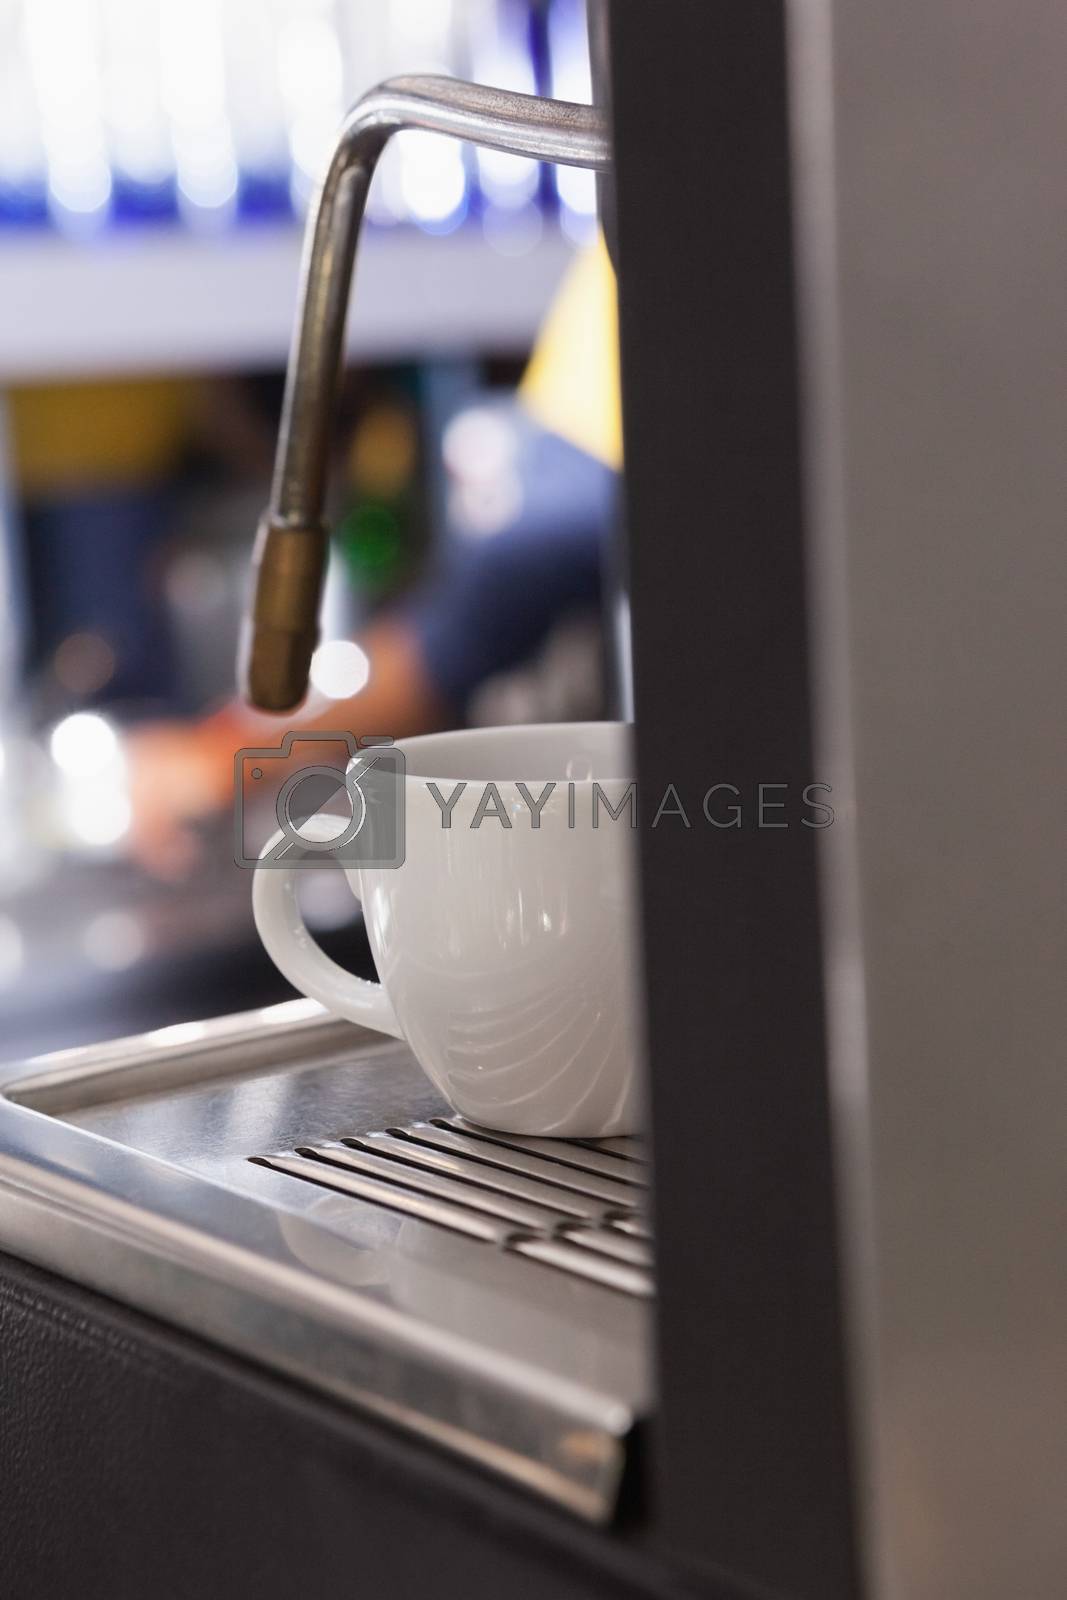 Royalty free image of Cup of coffee on the espresso maker by Wavebreakmedia